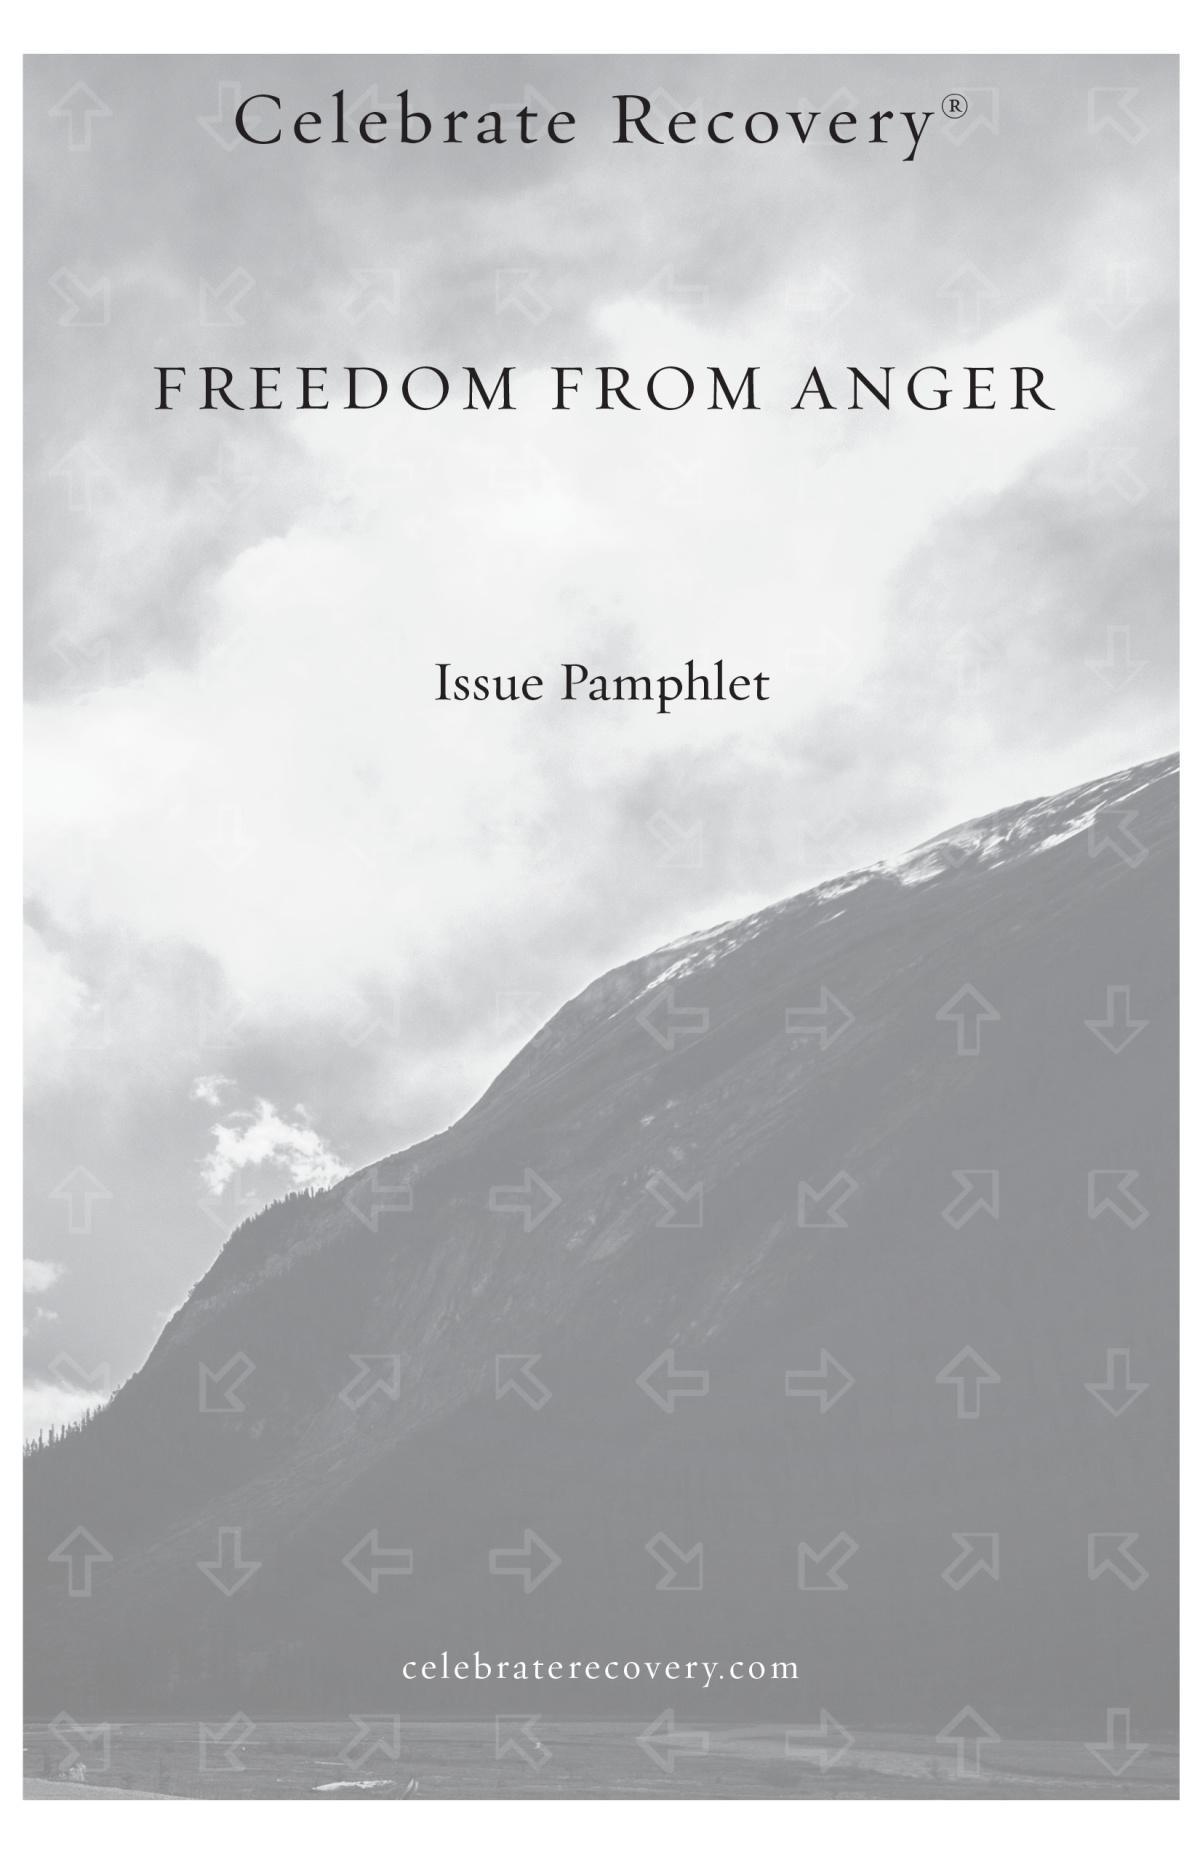 Freedom From Anger